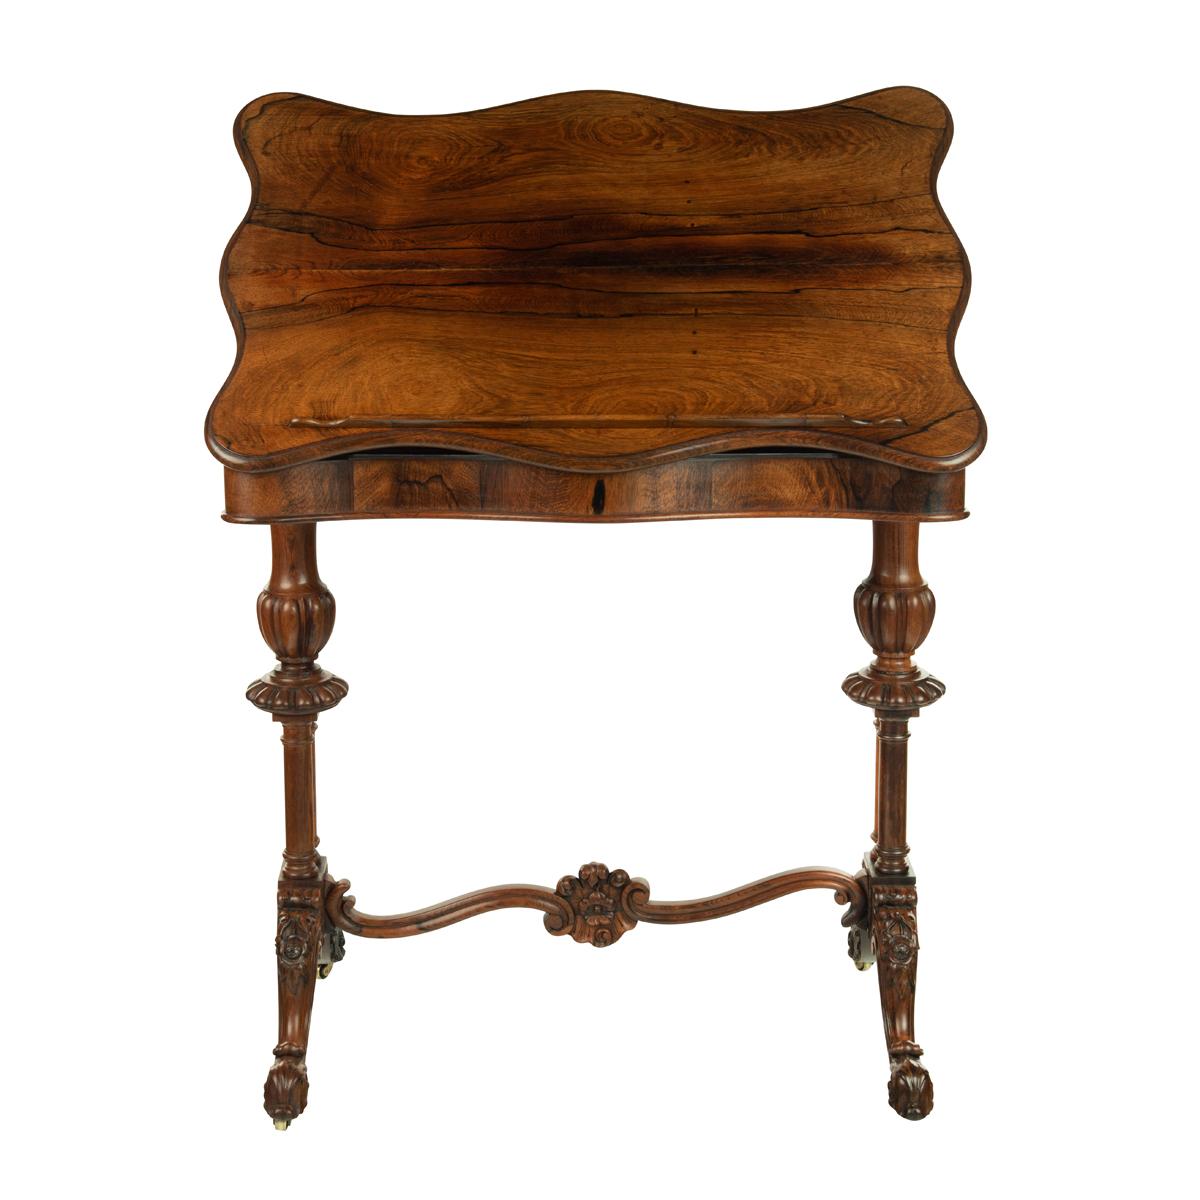 An early Victorian rosewood reading table, the shaped top hinged to form an adjustable reading slope with a ratcheted support and detachable rest, raised upon turned and flanged end supports with double columns above out splayed cabriole legs joined